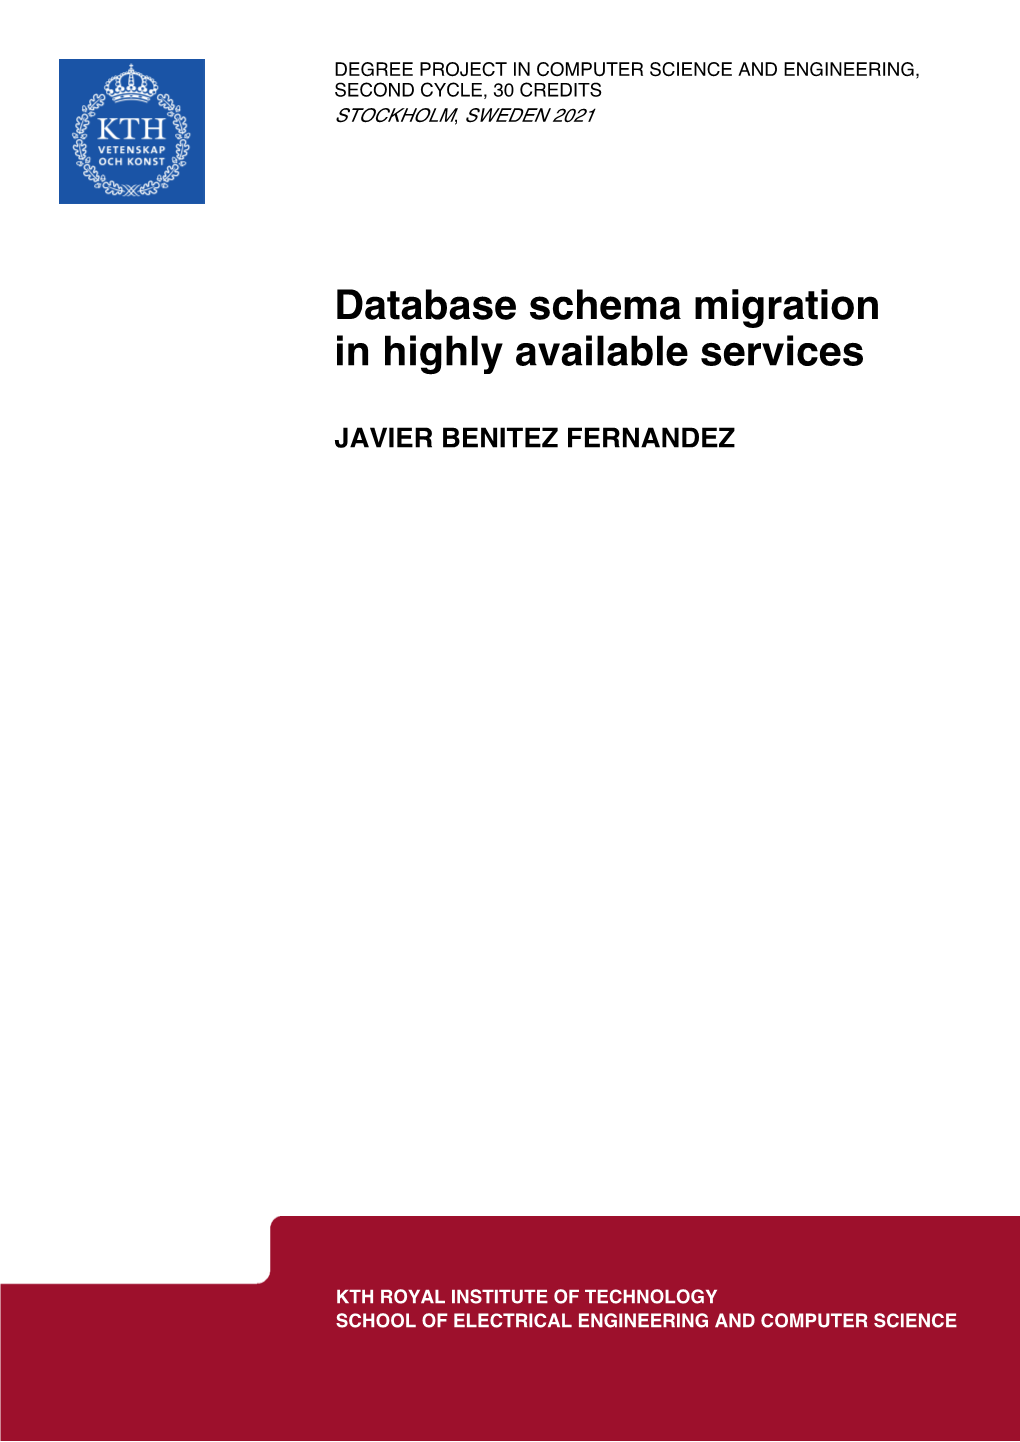 Database Schema Migration in Highly Available Services